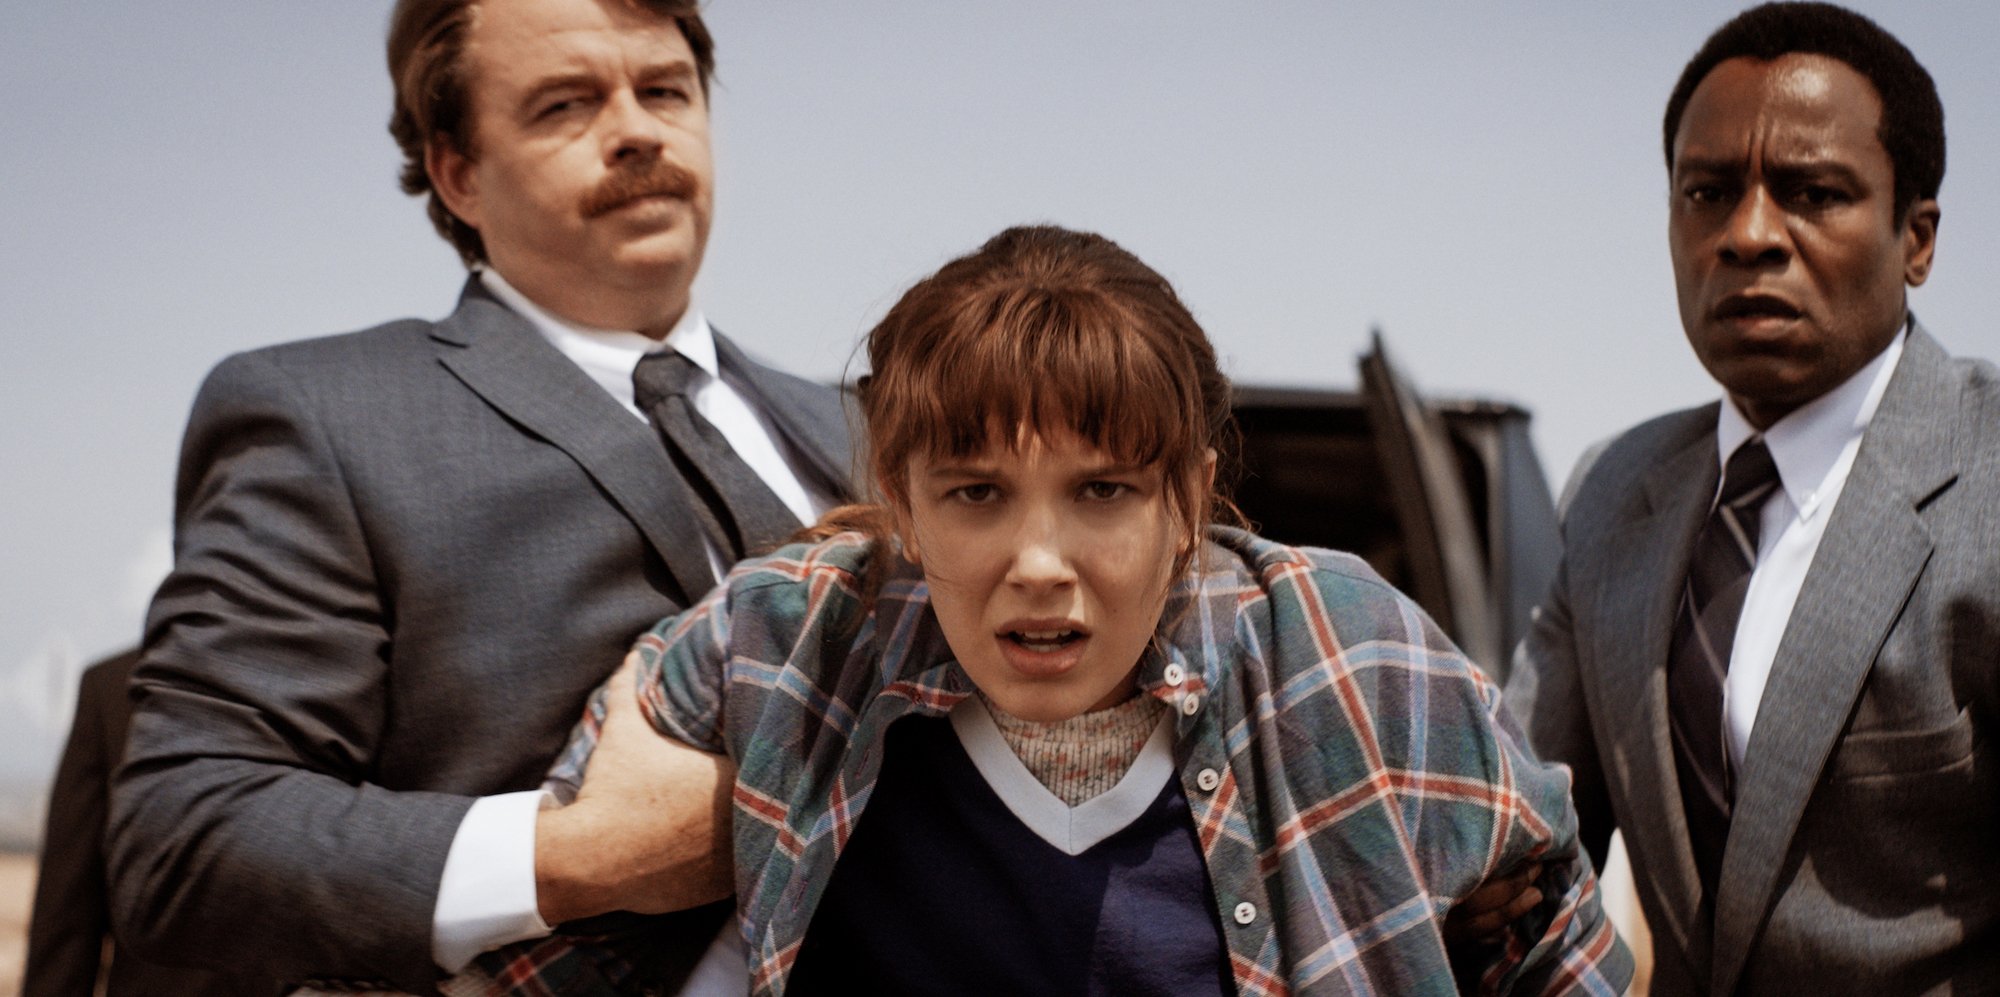 'Stranger Things' Season 4 production still of Eleven being held back by two men. A 'Stranger Things' Season 4 time jump would help explain the kids' ages.